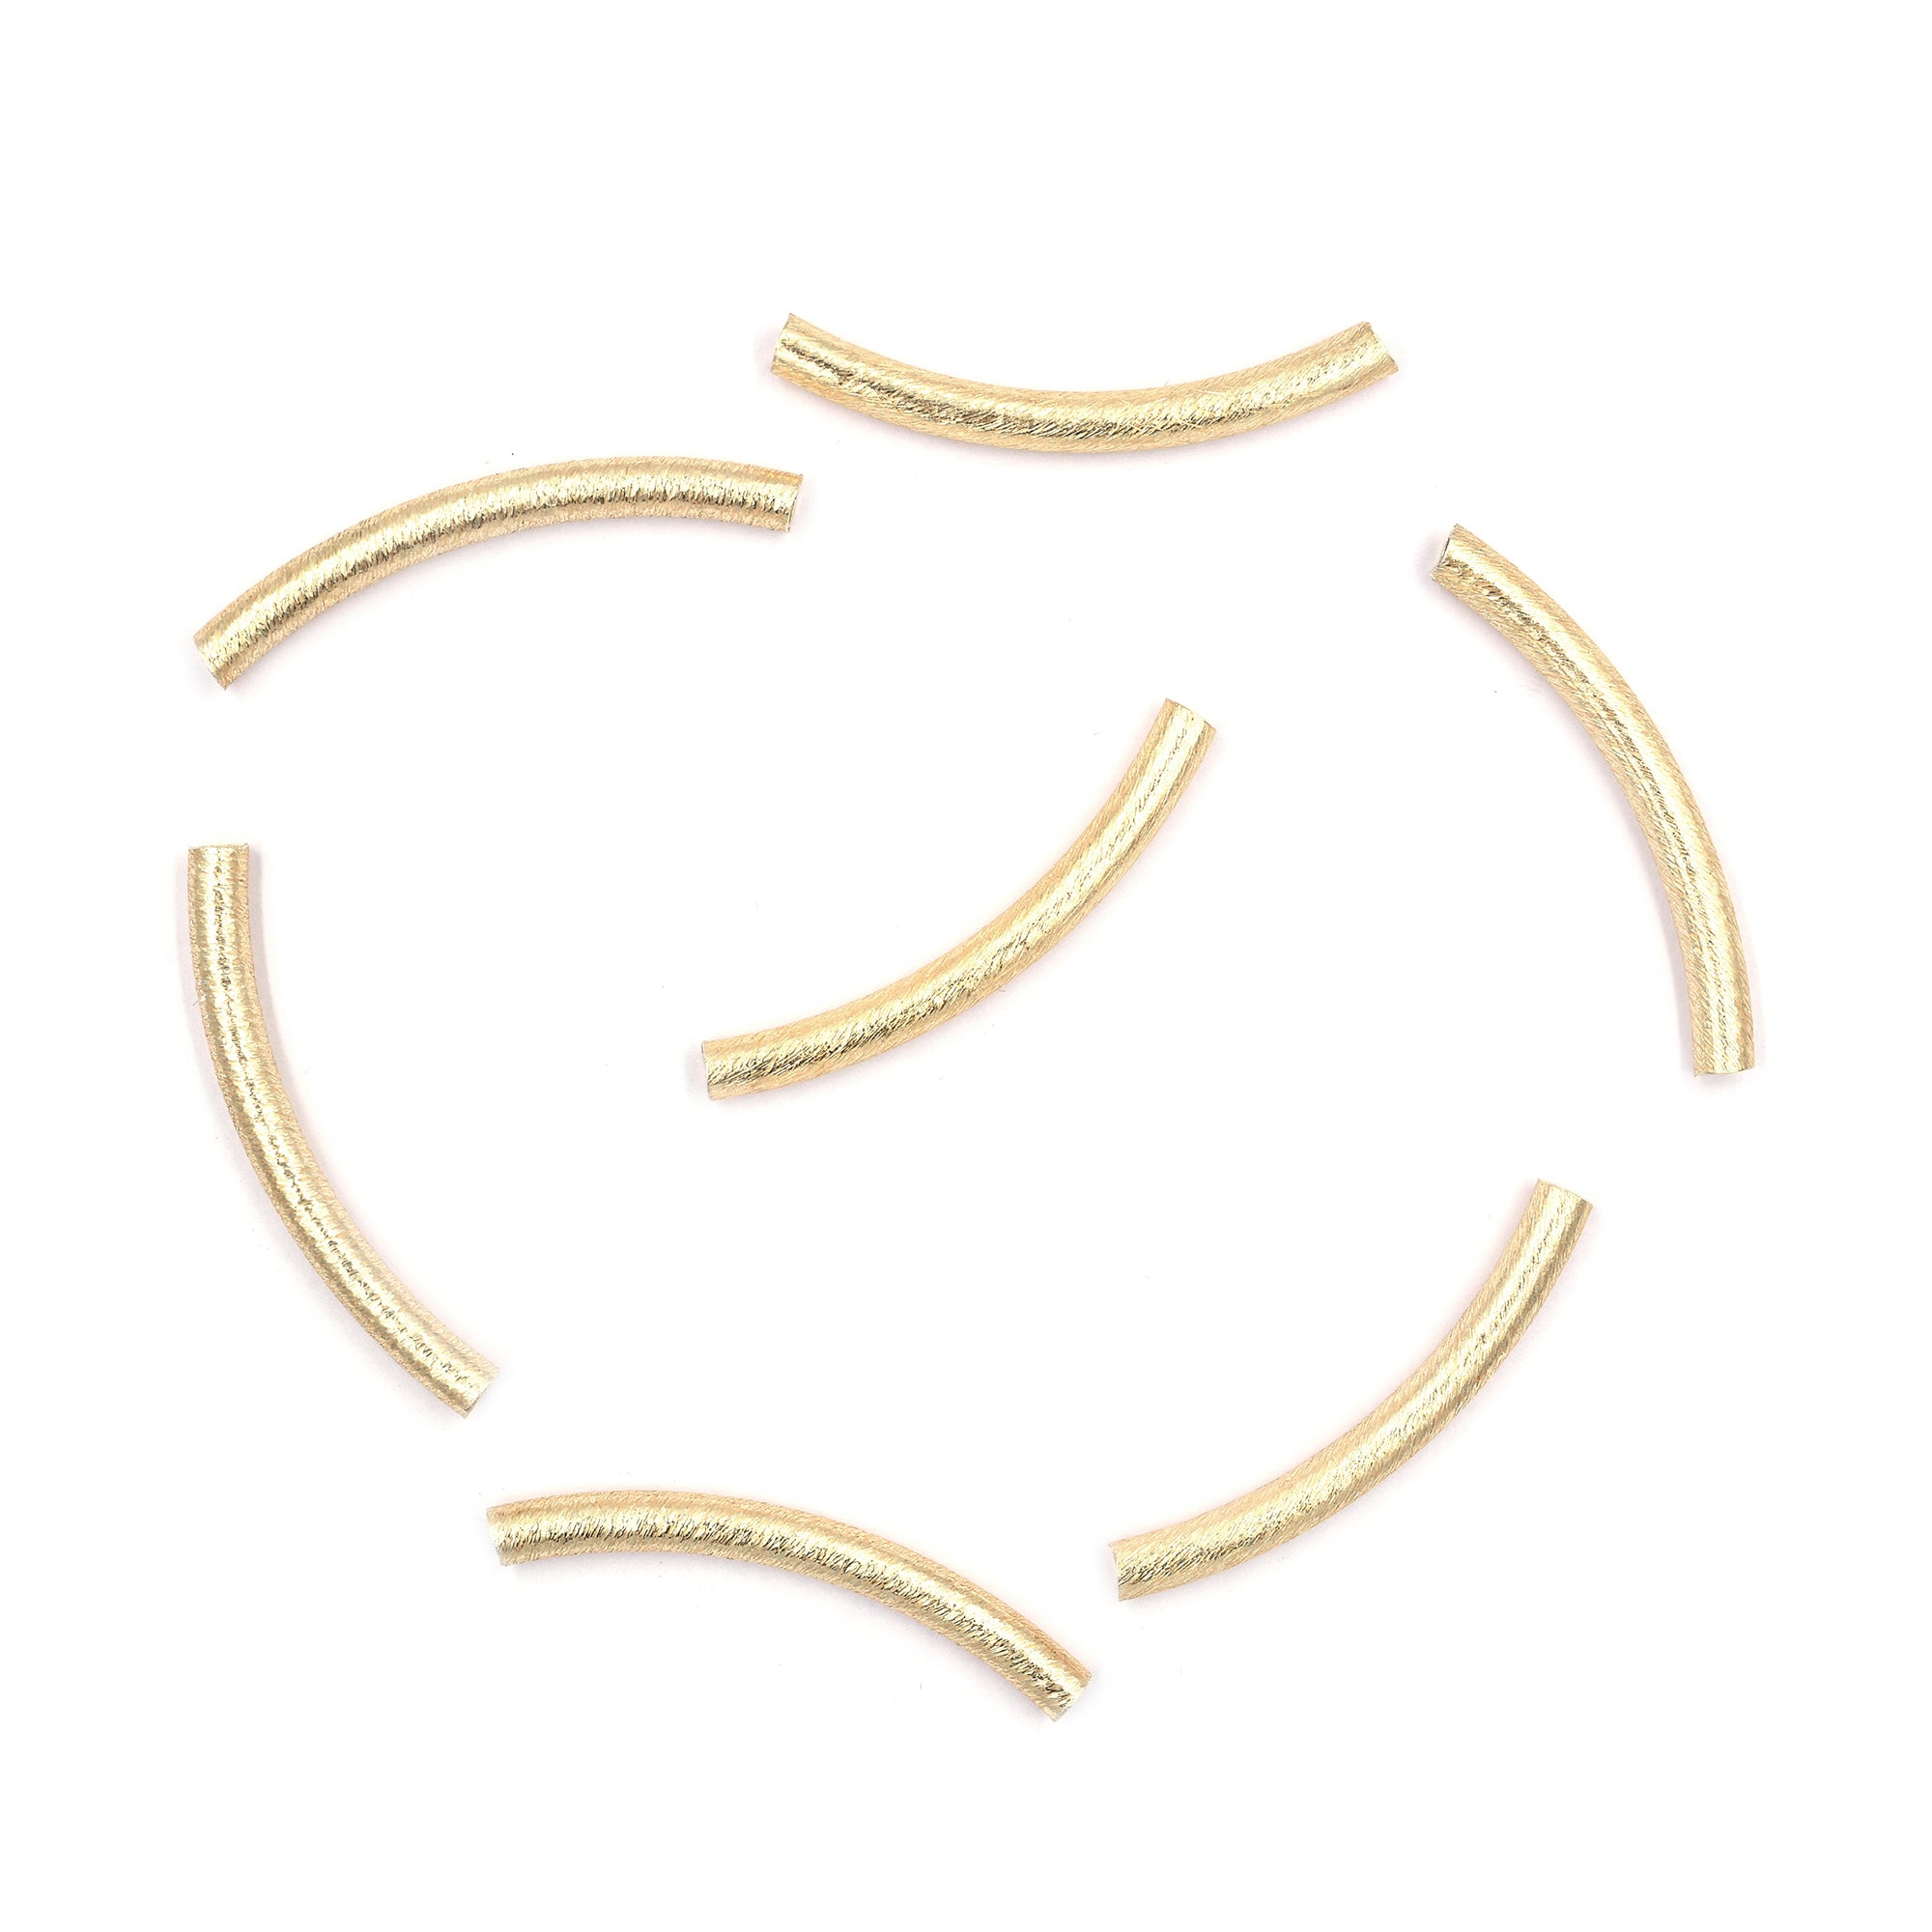 30 Pcs 40X4mm Curved Tube Brushed Matte Finish Beads Gold Plated Copper